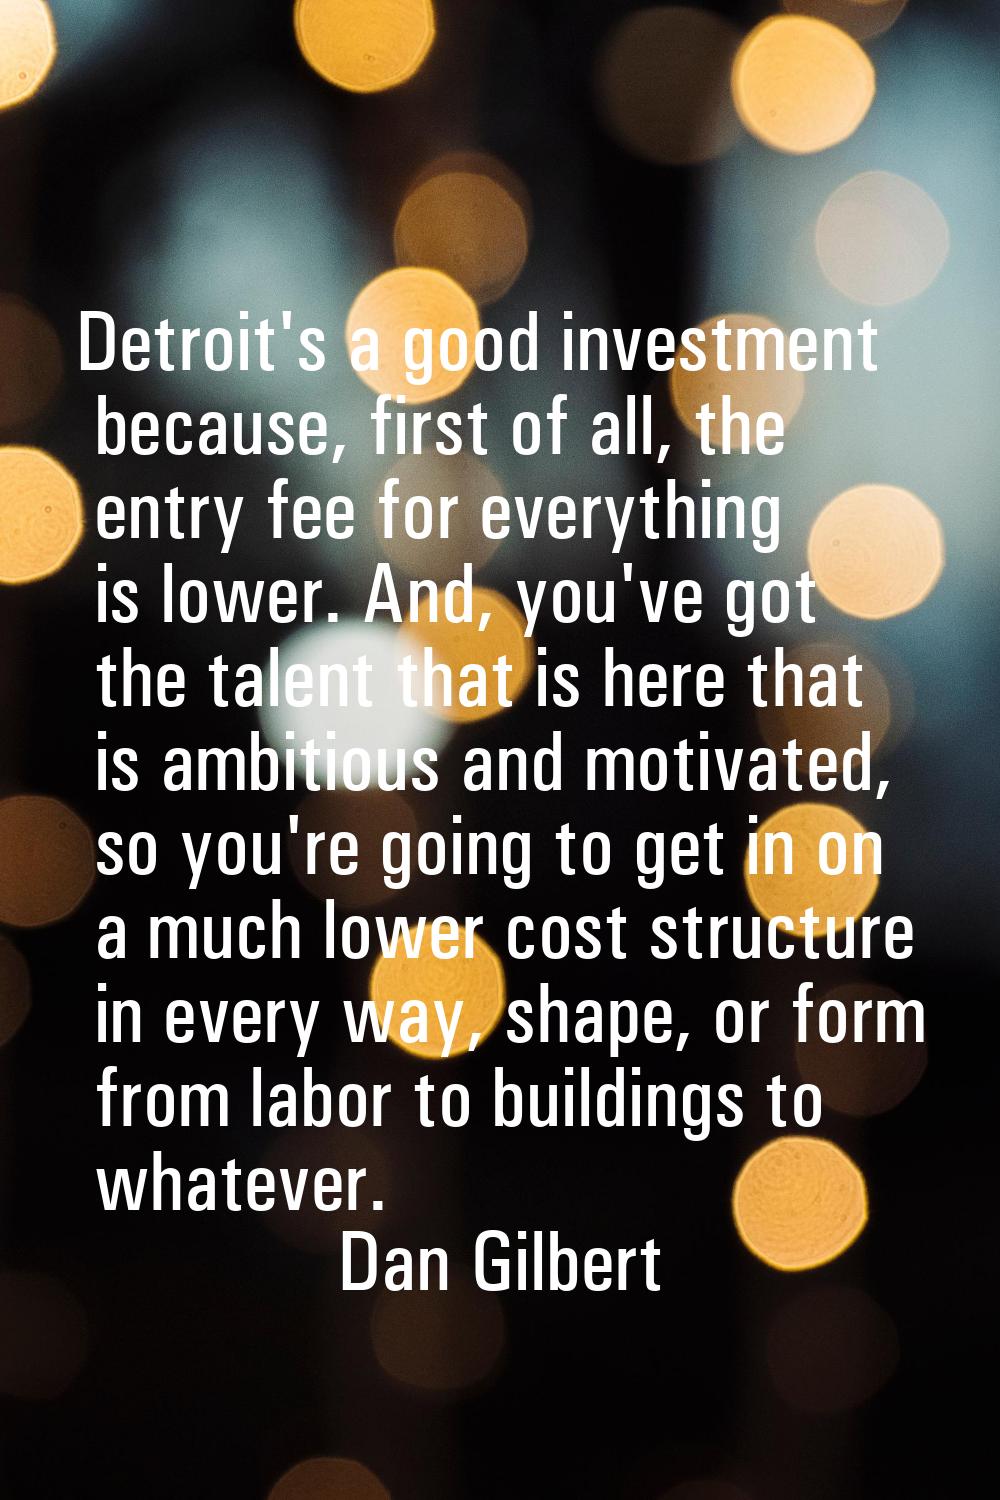 Detroit's a good investment because, first of all, the entry fee for everything is lower. And, you'